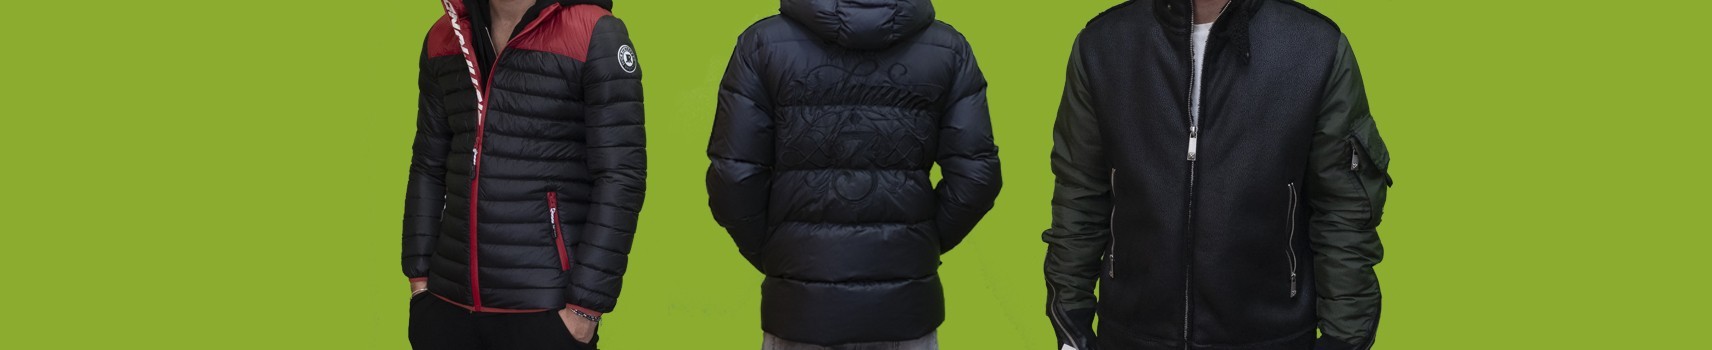 Men's Winter Jackets and Down Jackets | AGEMINA Fashion Boutique